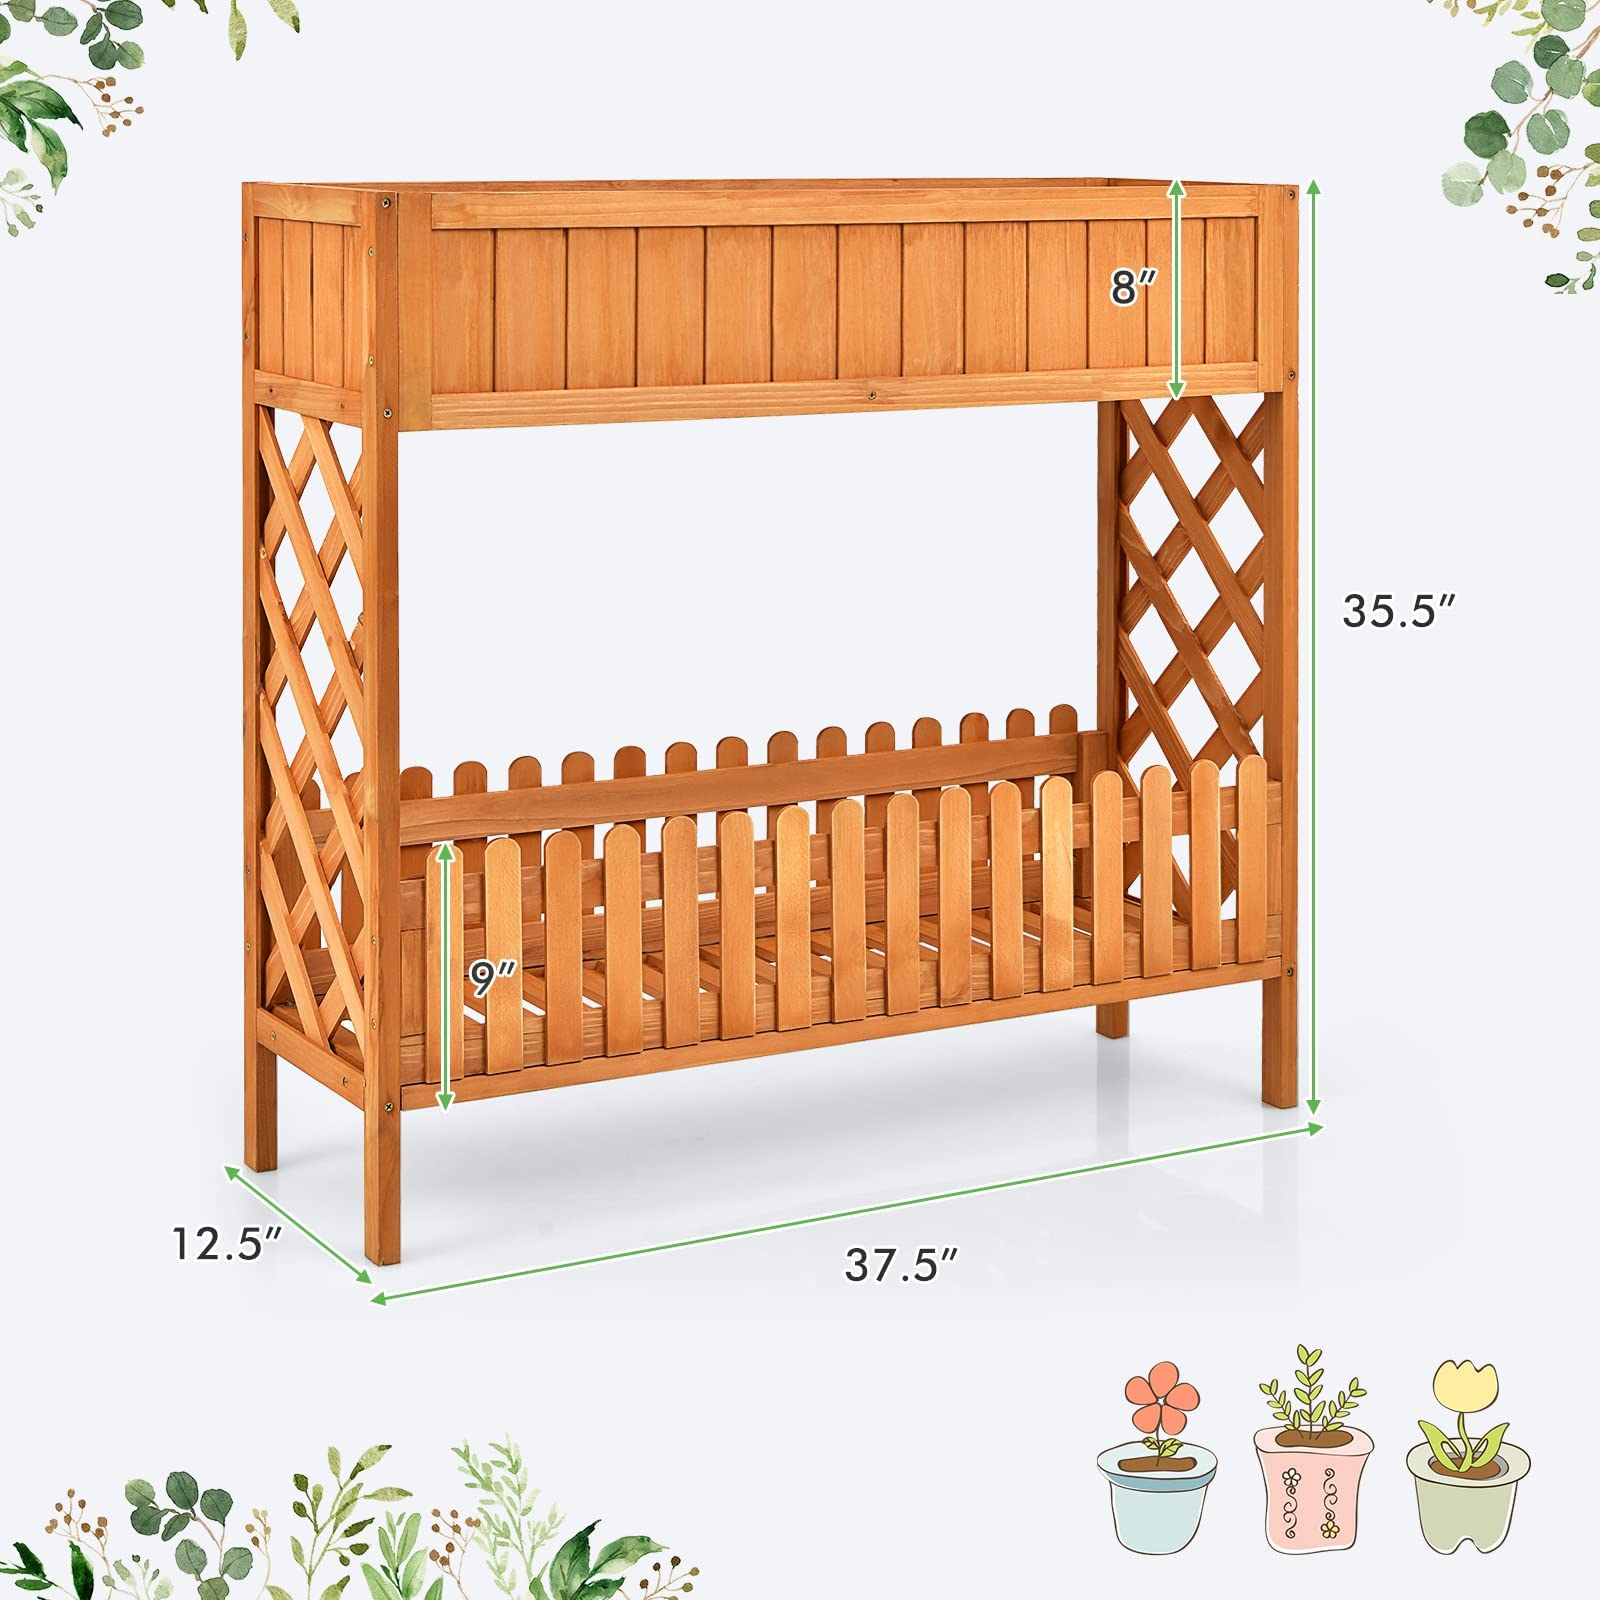 2-Tier Wood Potted Plant Rack with Fence